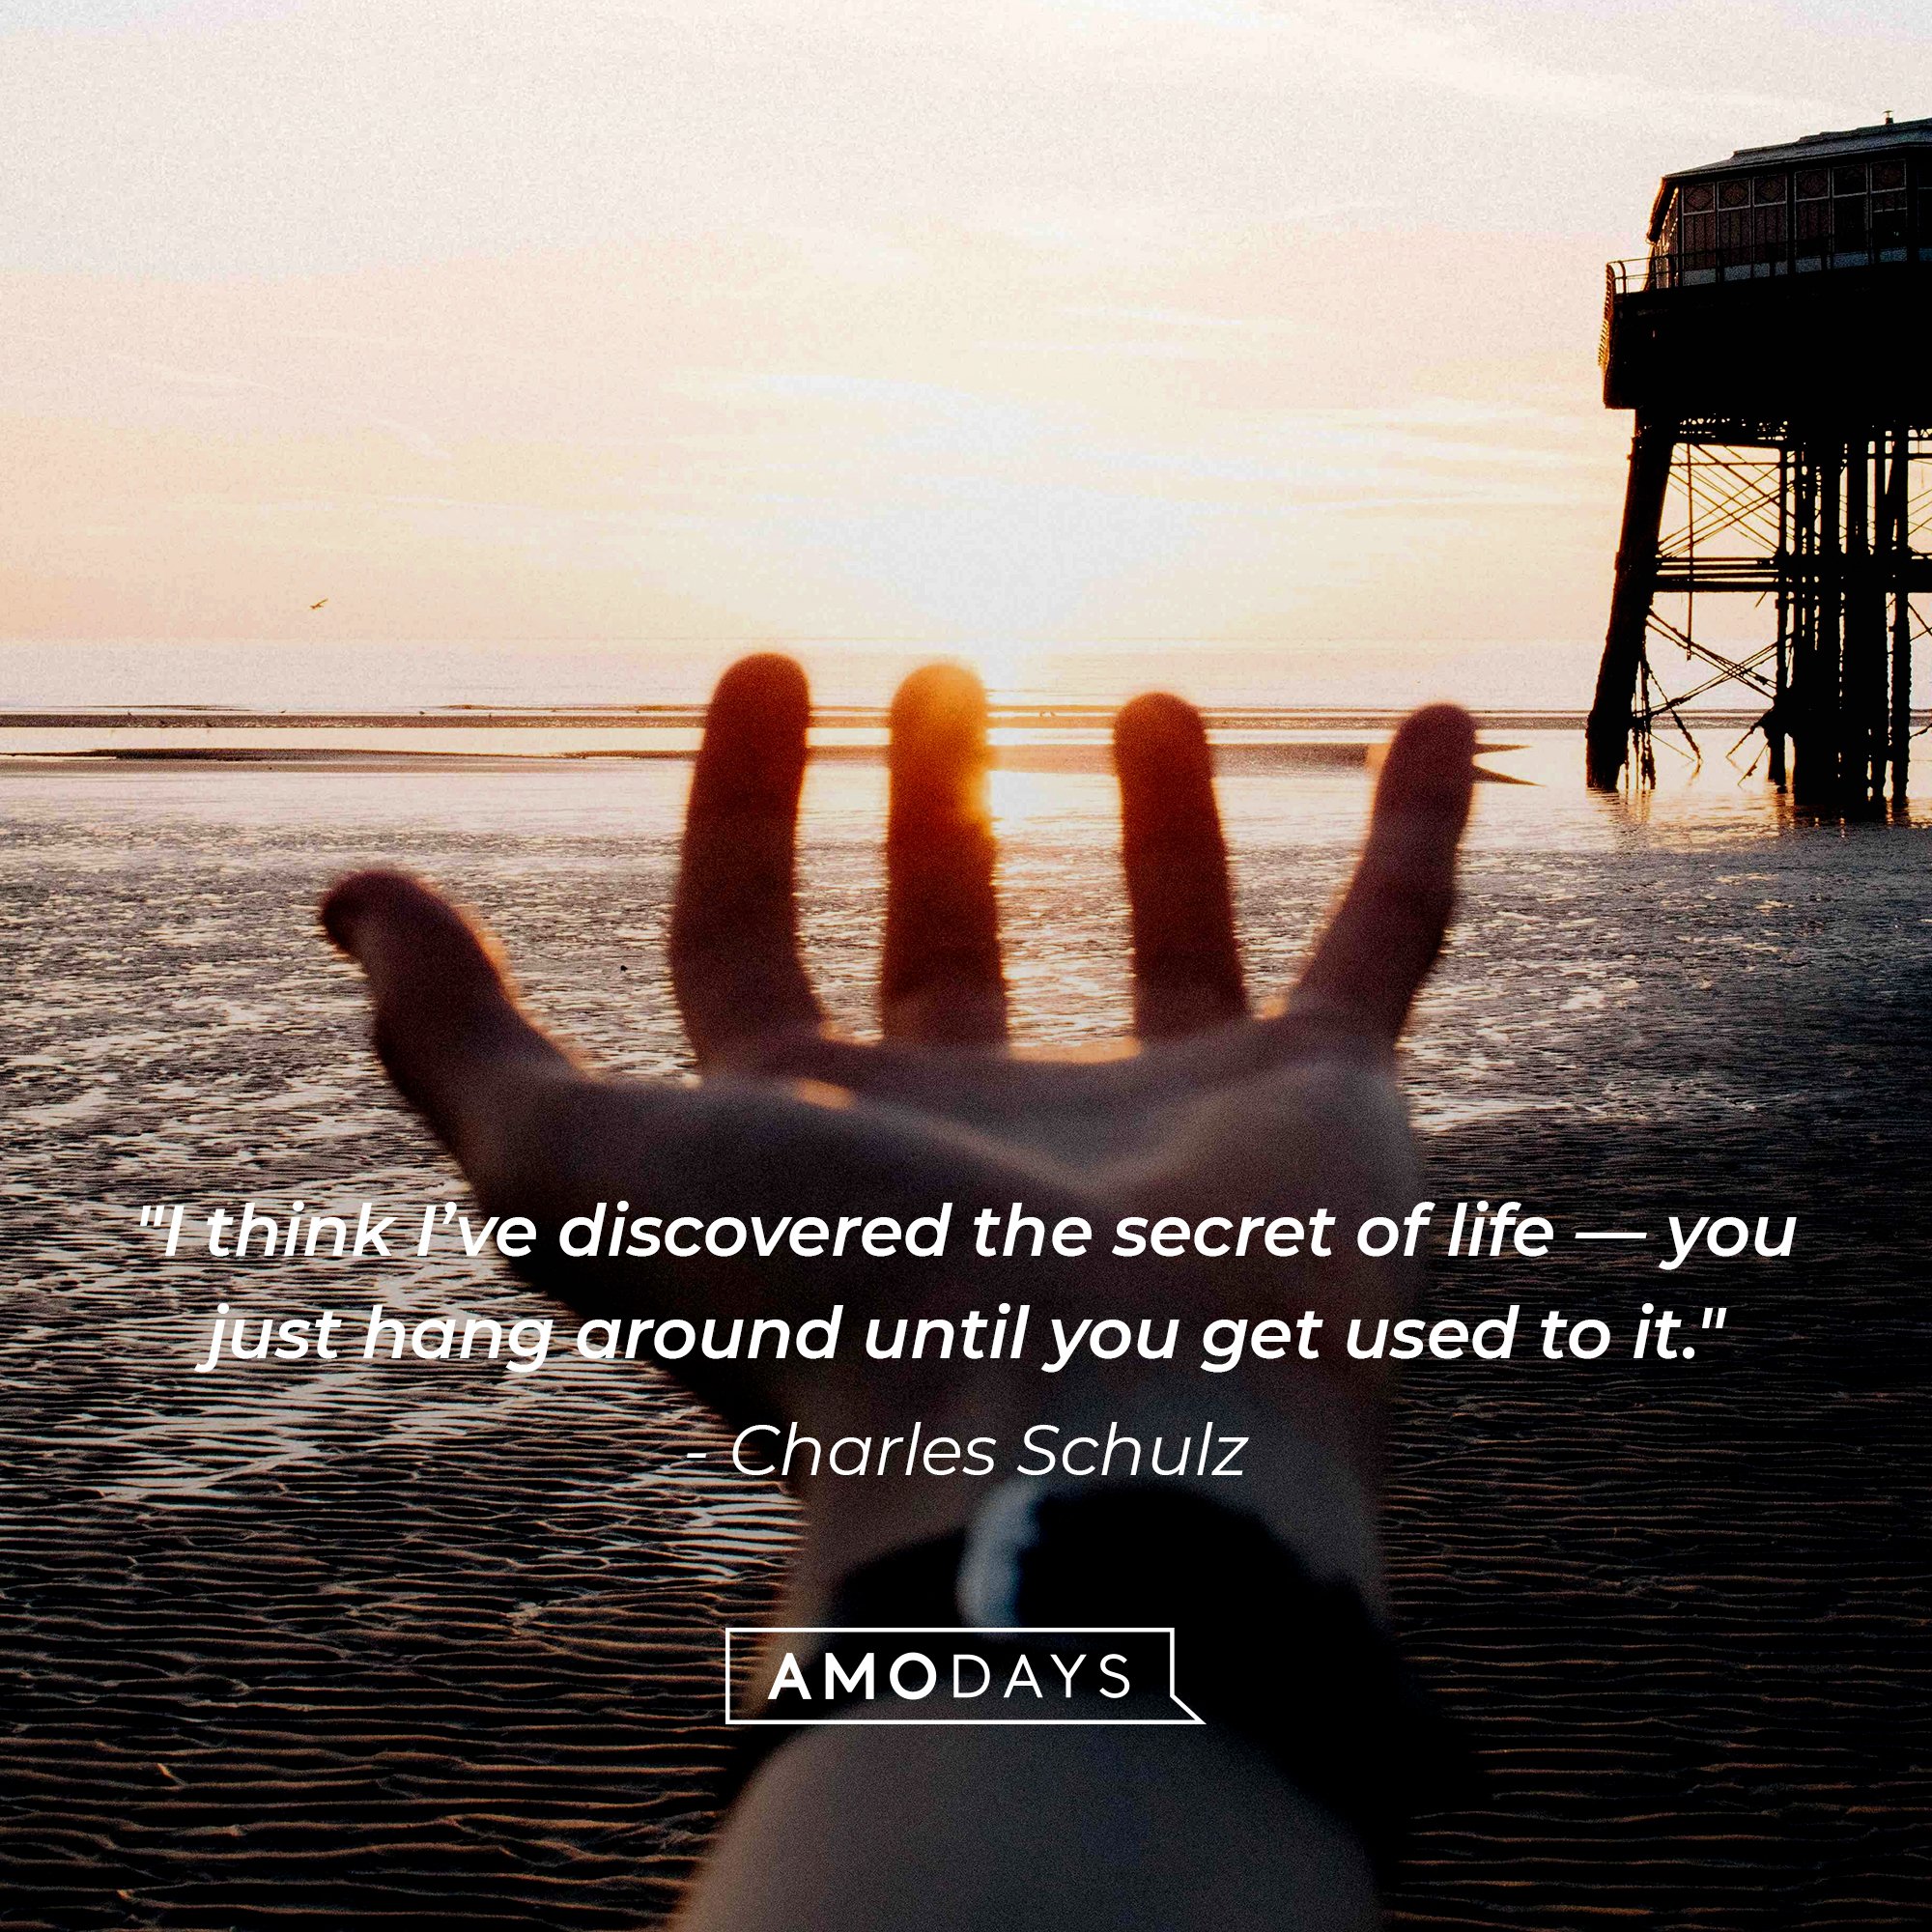  Charles Schulz 's quote: "I think I’ve discovered the secret of life — you just hang around until you get used to it." | Image: AmoDays